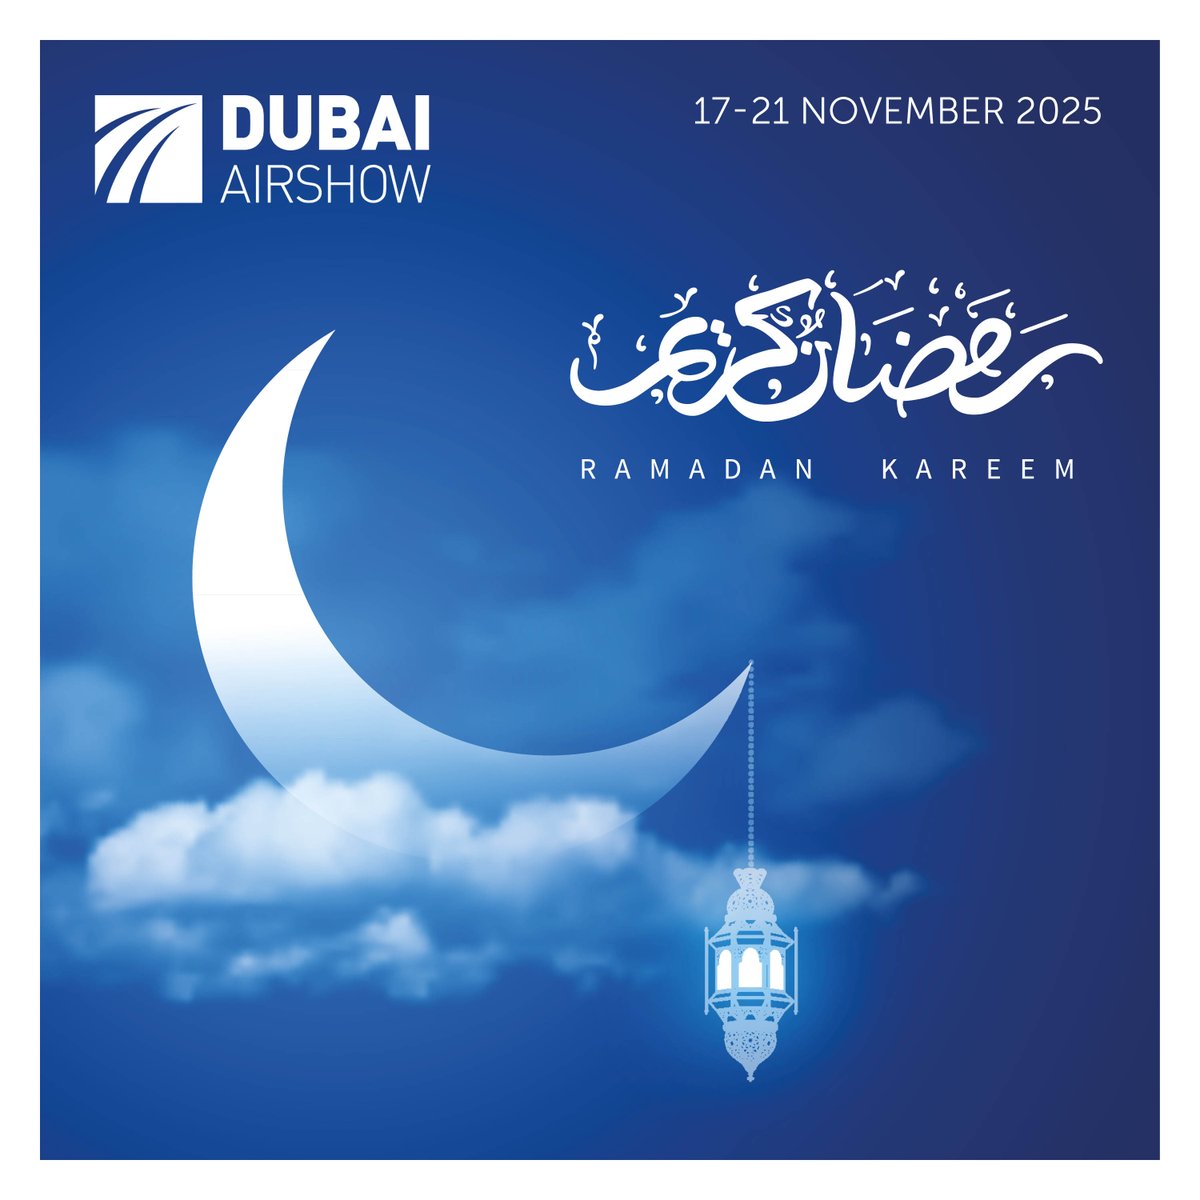 Ramadan Kareem from the Dubai Airshow! 🌙 Wishing you a blessed month filled with joy, prosperity, and happiness. #ramadankareem #ramadan2024 #DubaiAirshow